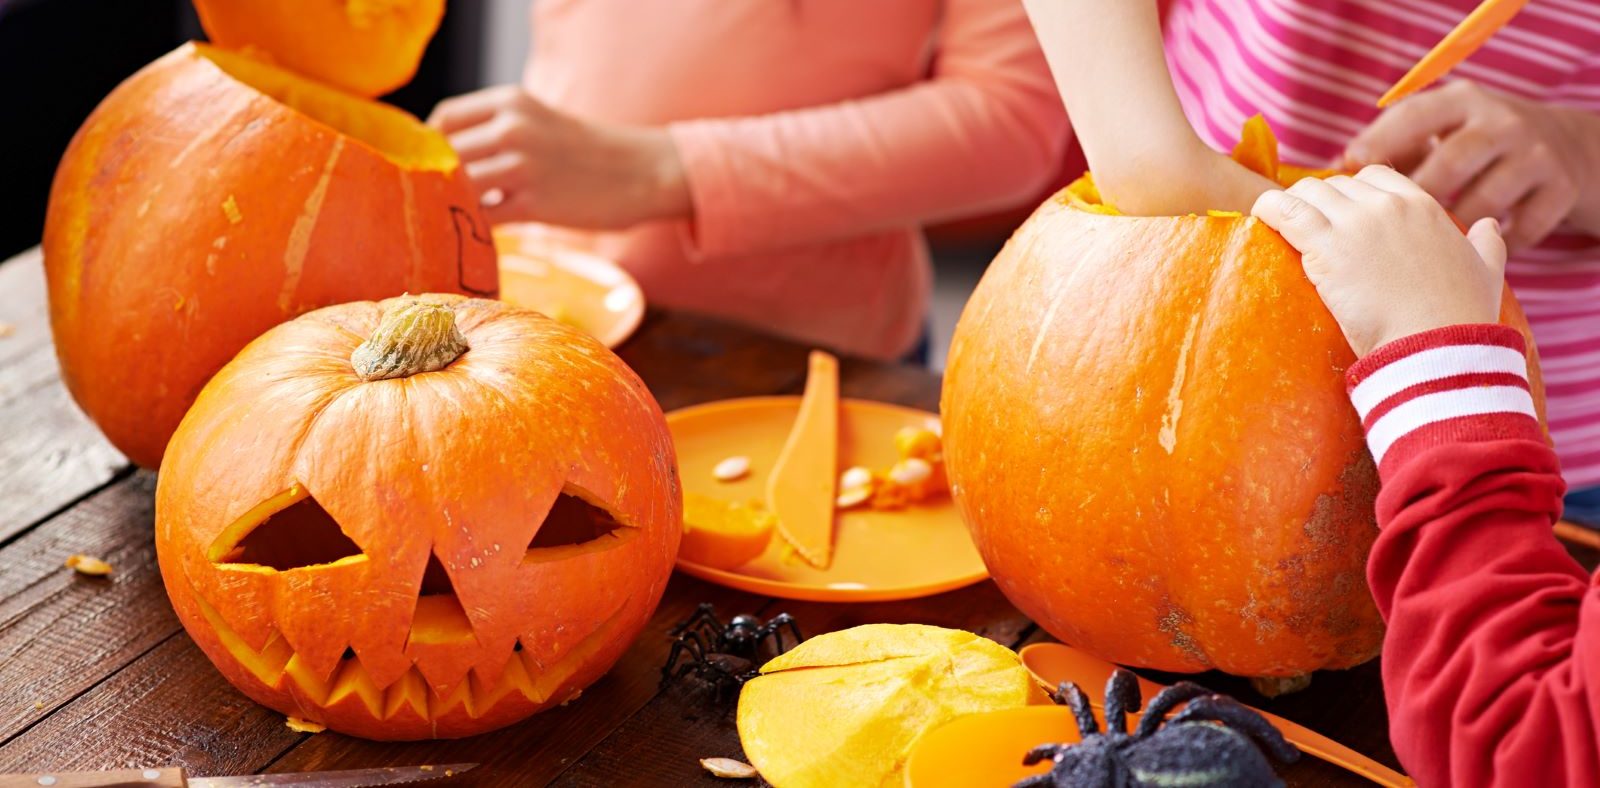 2 Simple Tips to Avoid Injuries While Pumpkin Carving